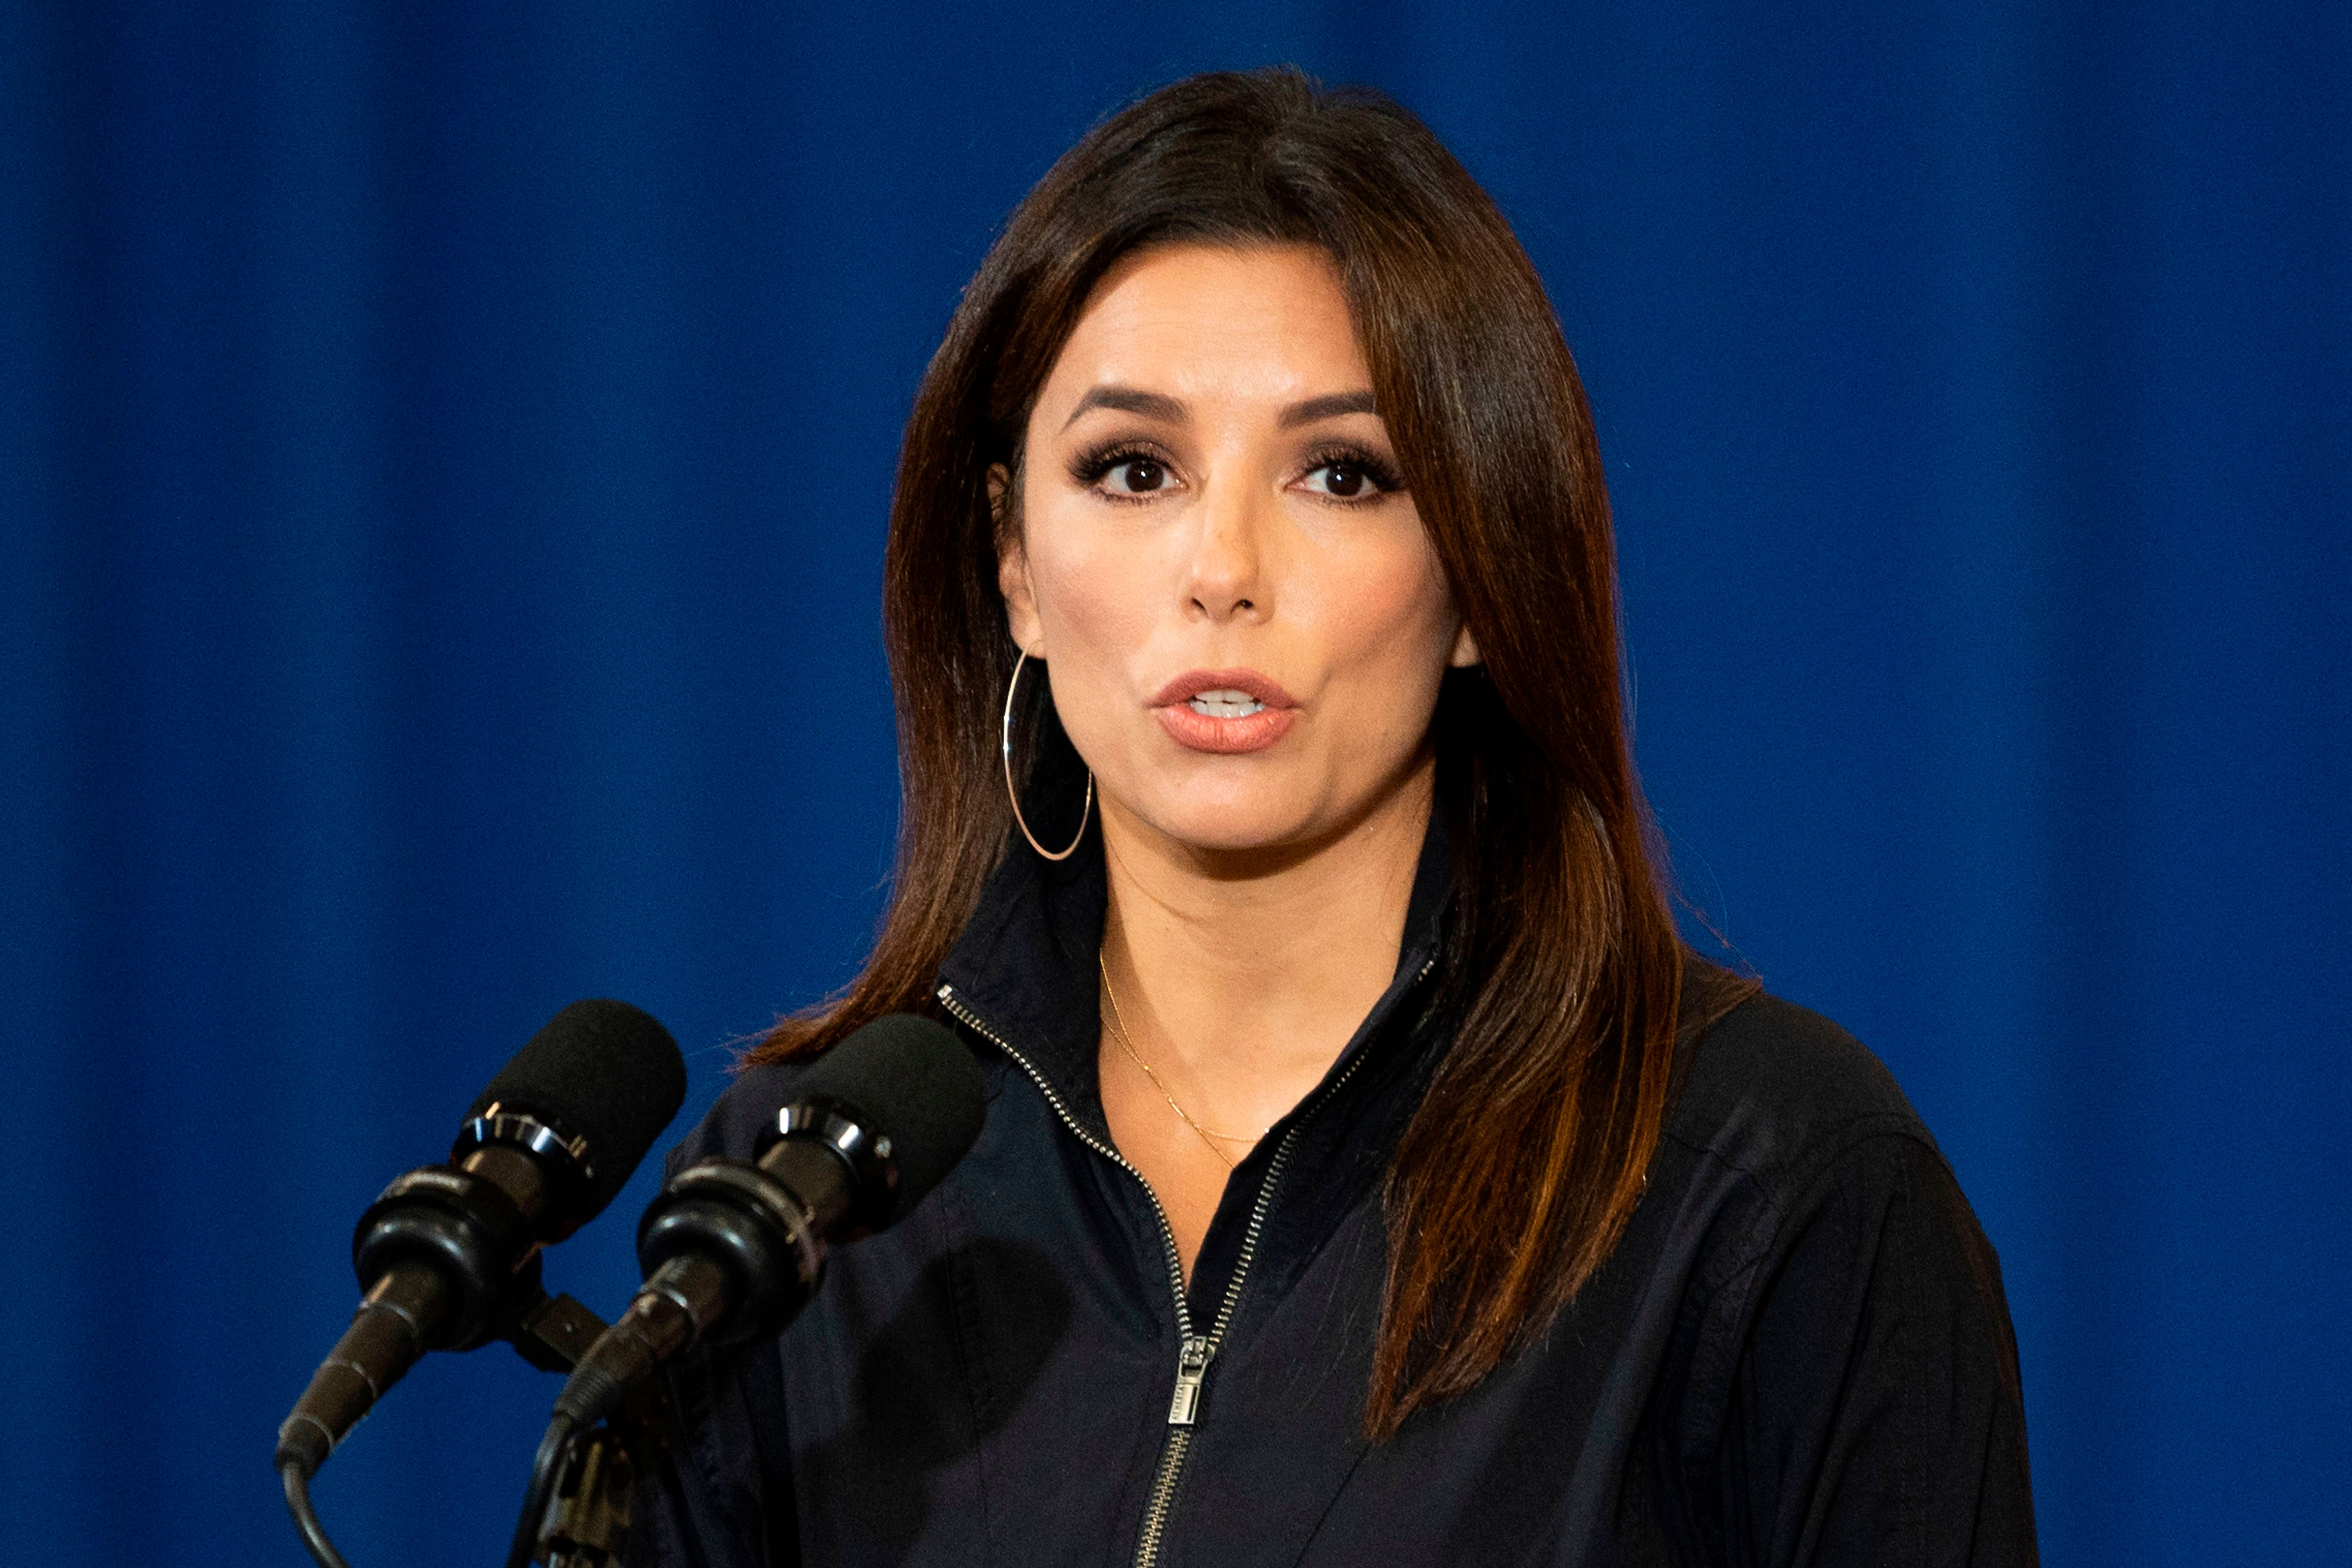 Eva Longoria, actress, activist, and Co-Founder of Latino Victory, speaks before Democratic Presidential Candidate Joe Biden as they participate in a Hispanic Heritage Month event at the Osceola Heritage Park in Kissimmee, Florida on September 15, 2020 | Photo: Getty Images